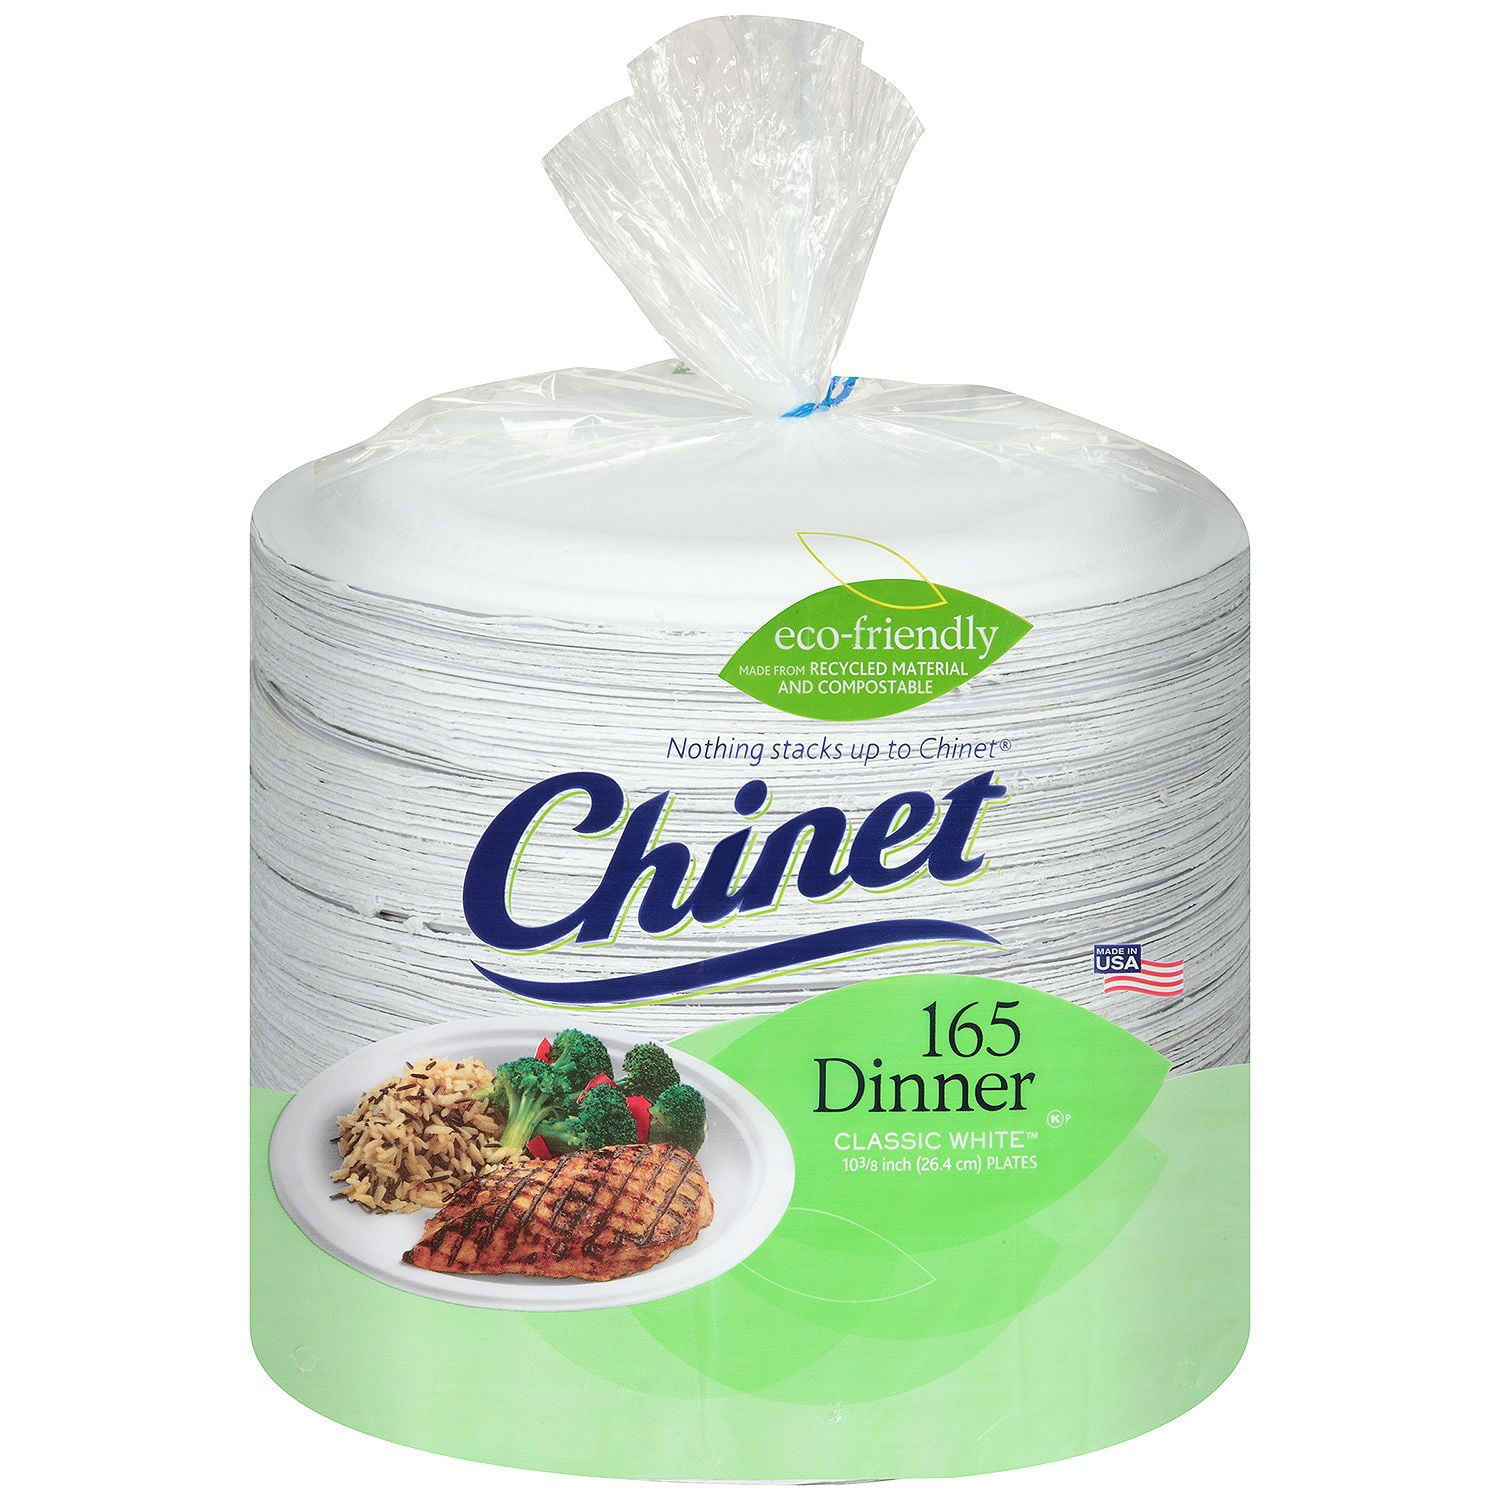 Chinet® Classic Dessert Paper Plates - White, 70 ct / 6.75 in - Pay Less  Super Markets